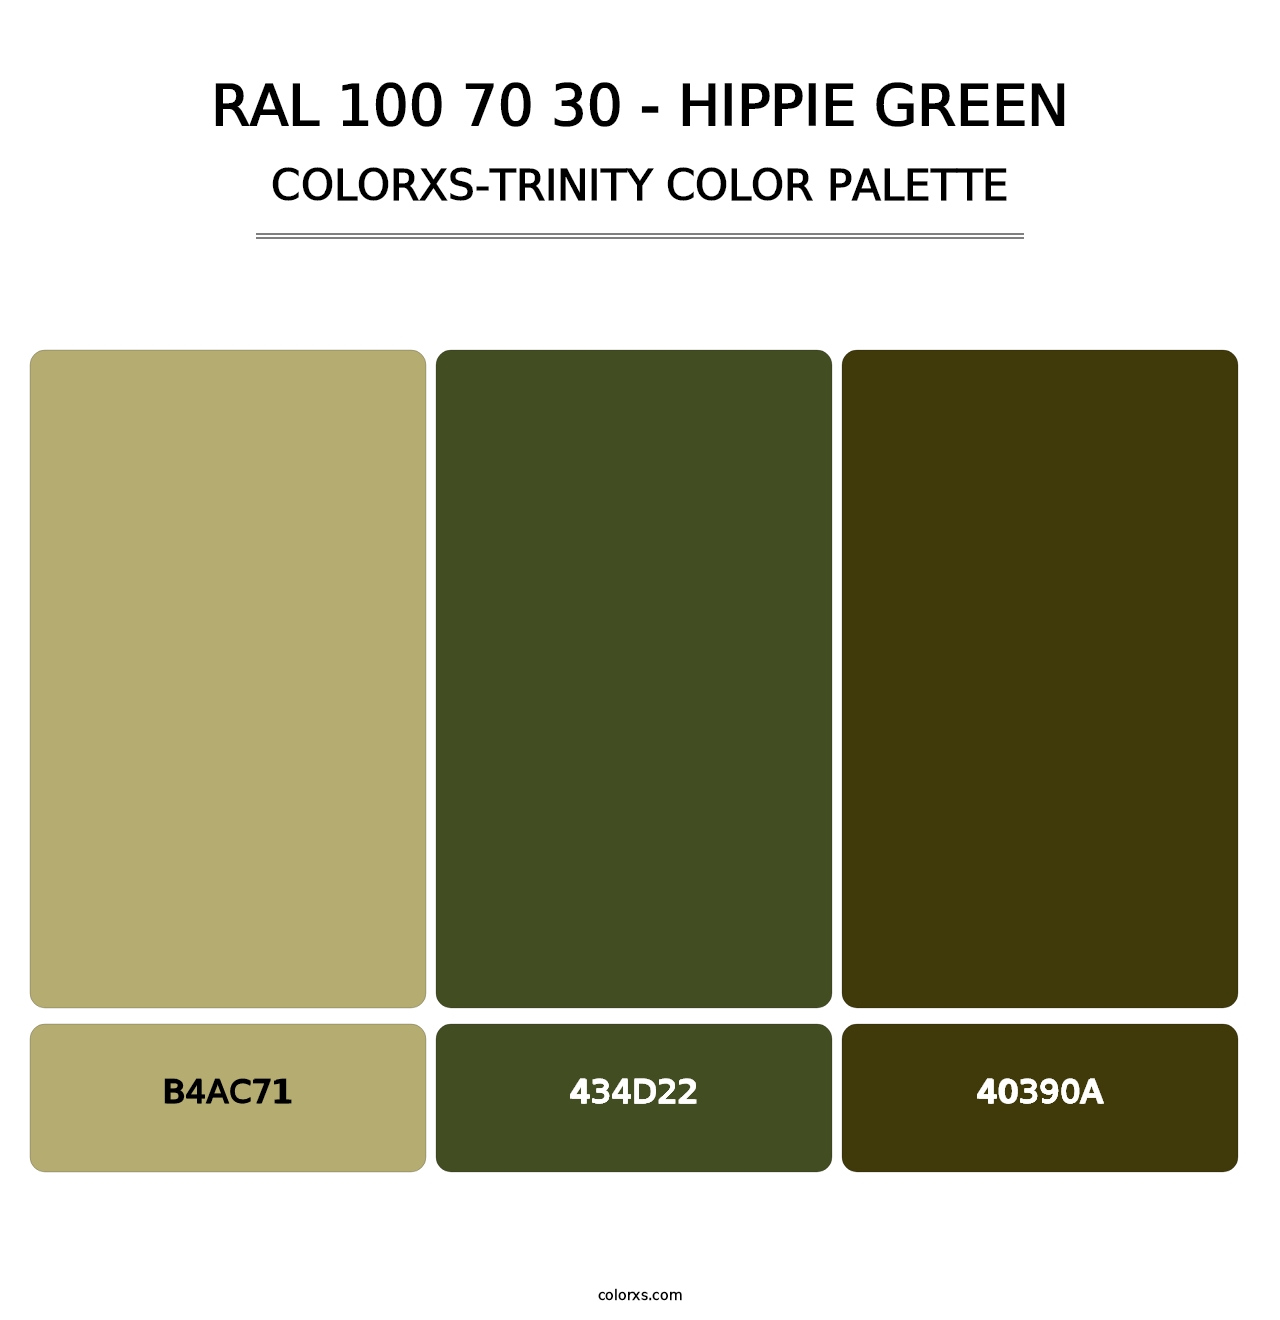 RAL 100 70 30 - Hippie Green - Colorxs Trinity Palette